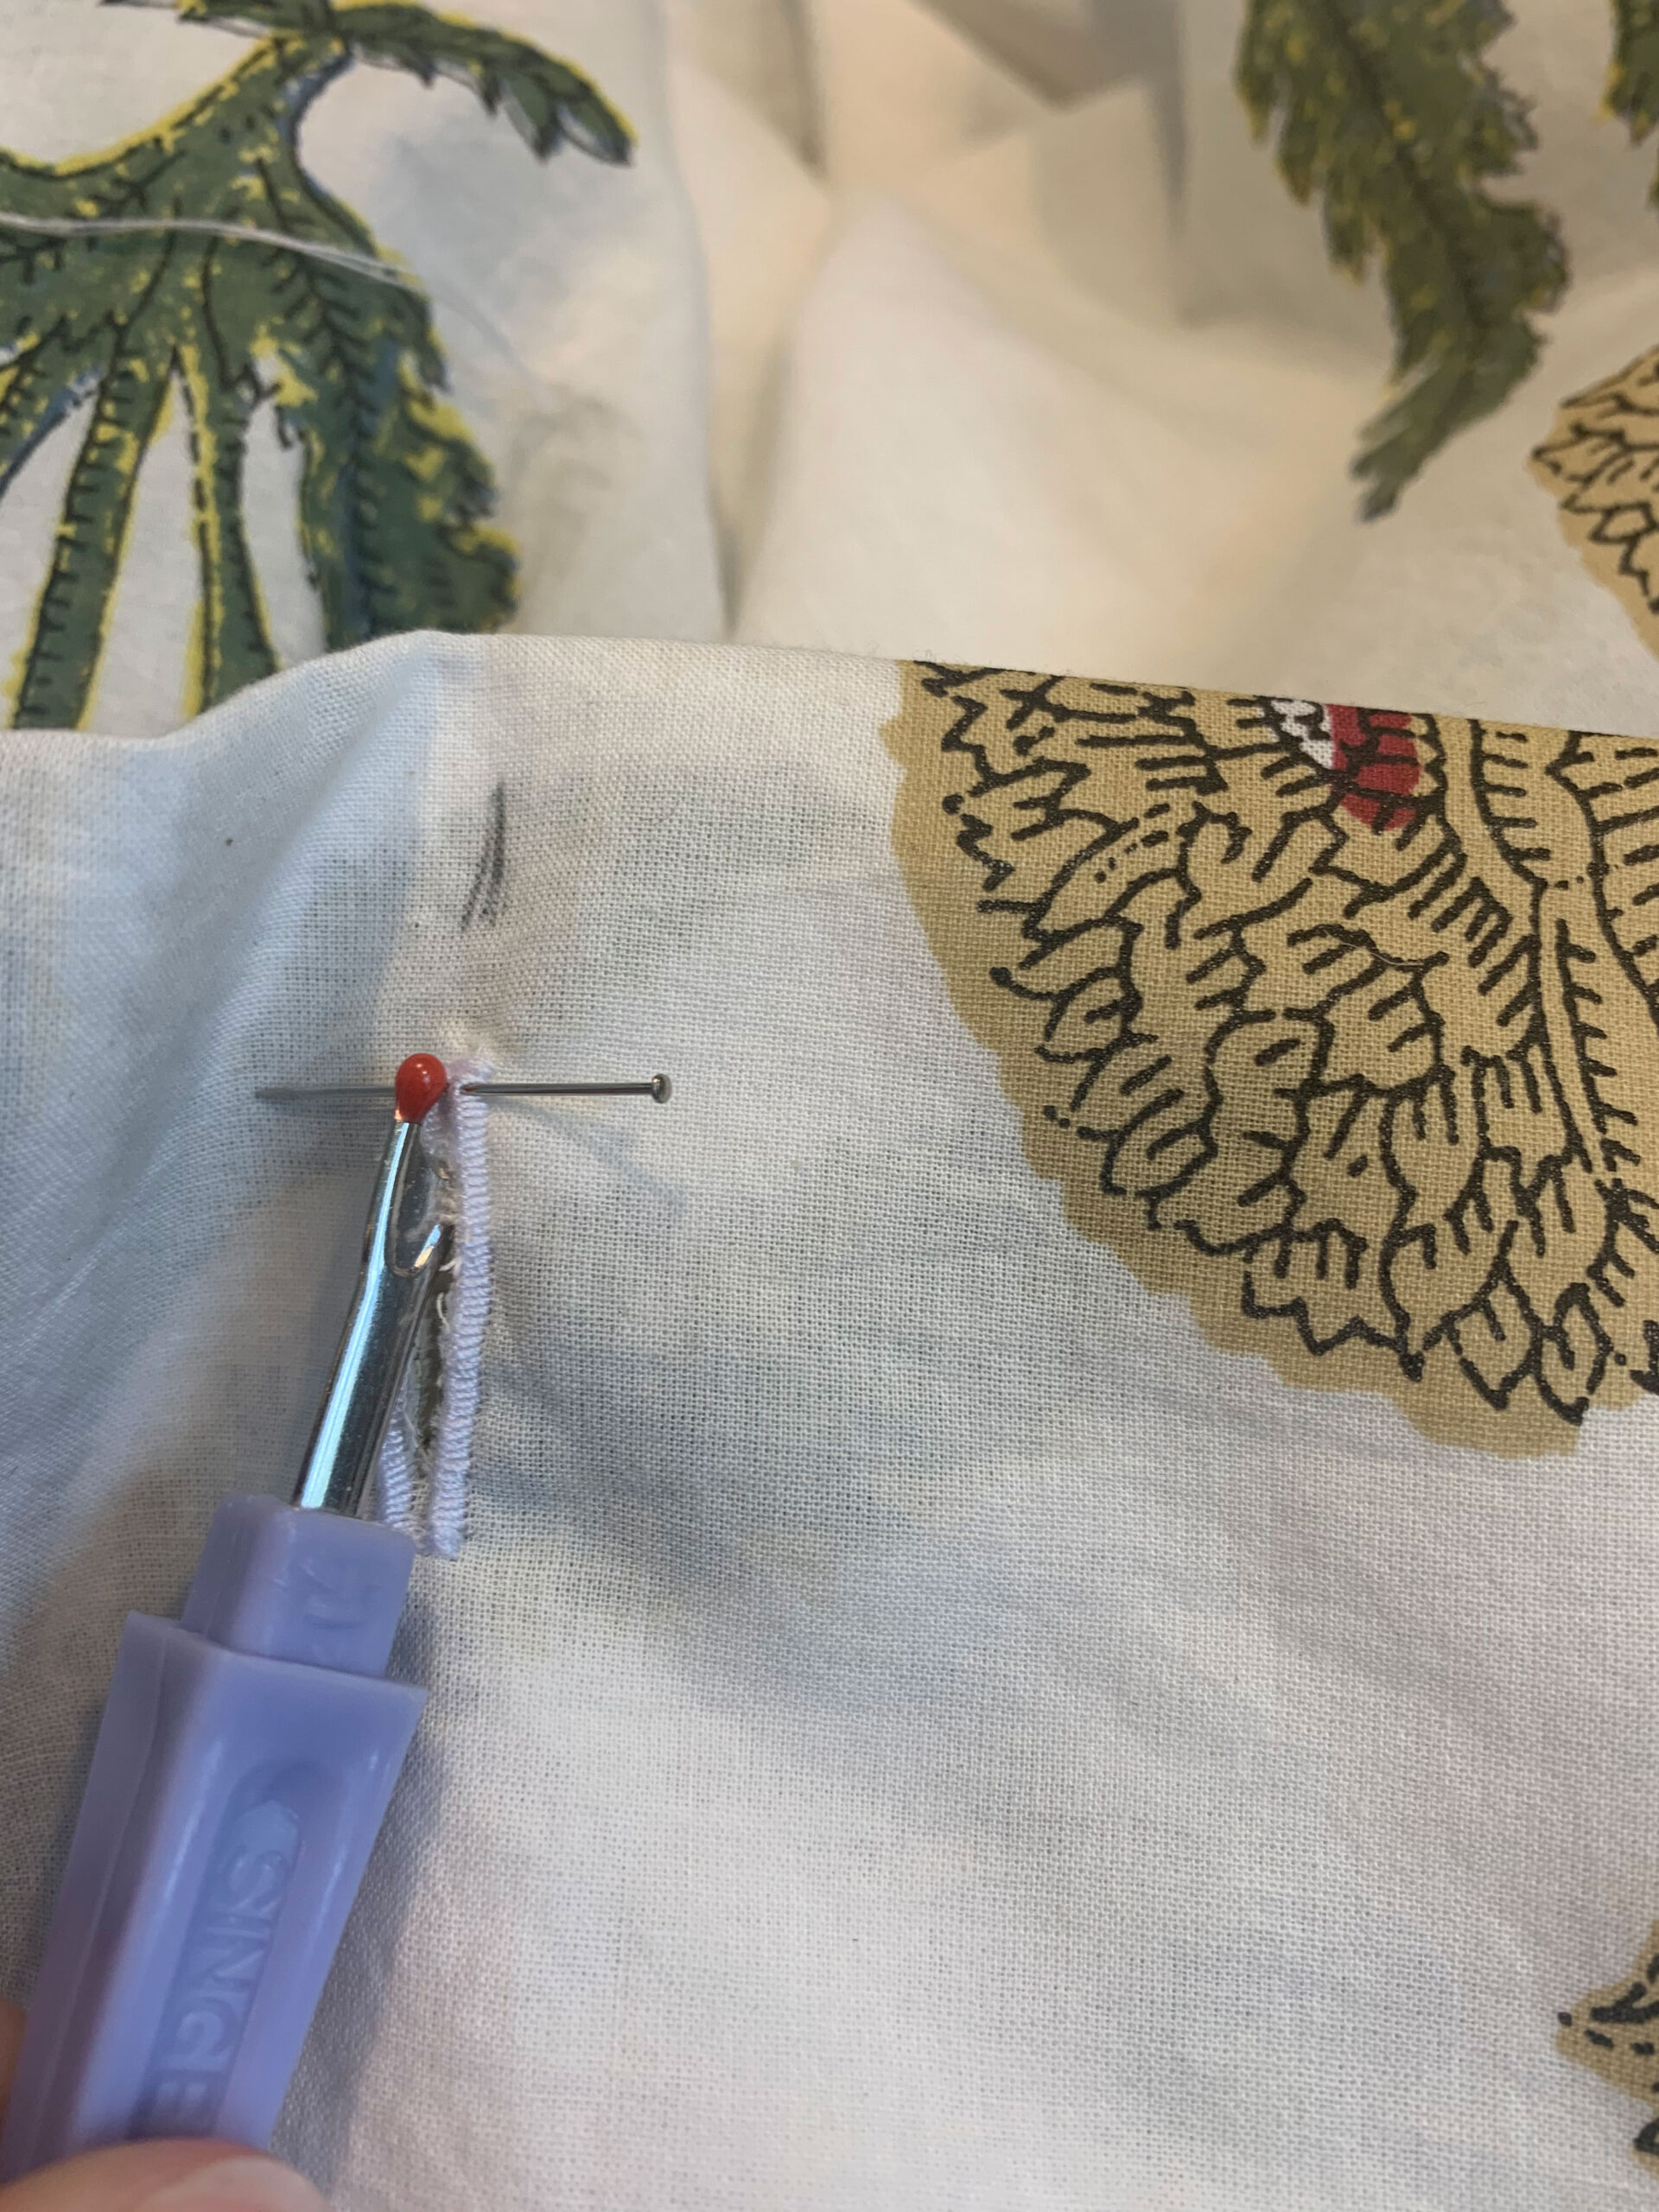 using a seam ripper to cut the fabric inside the button hole with a pin to stop the seam ripper from going too far